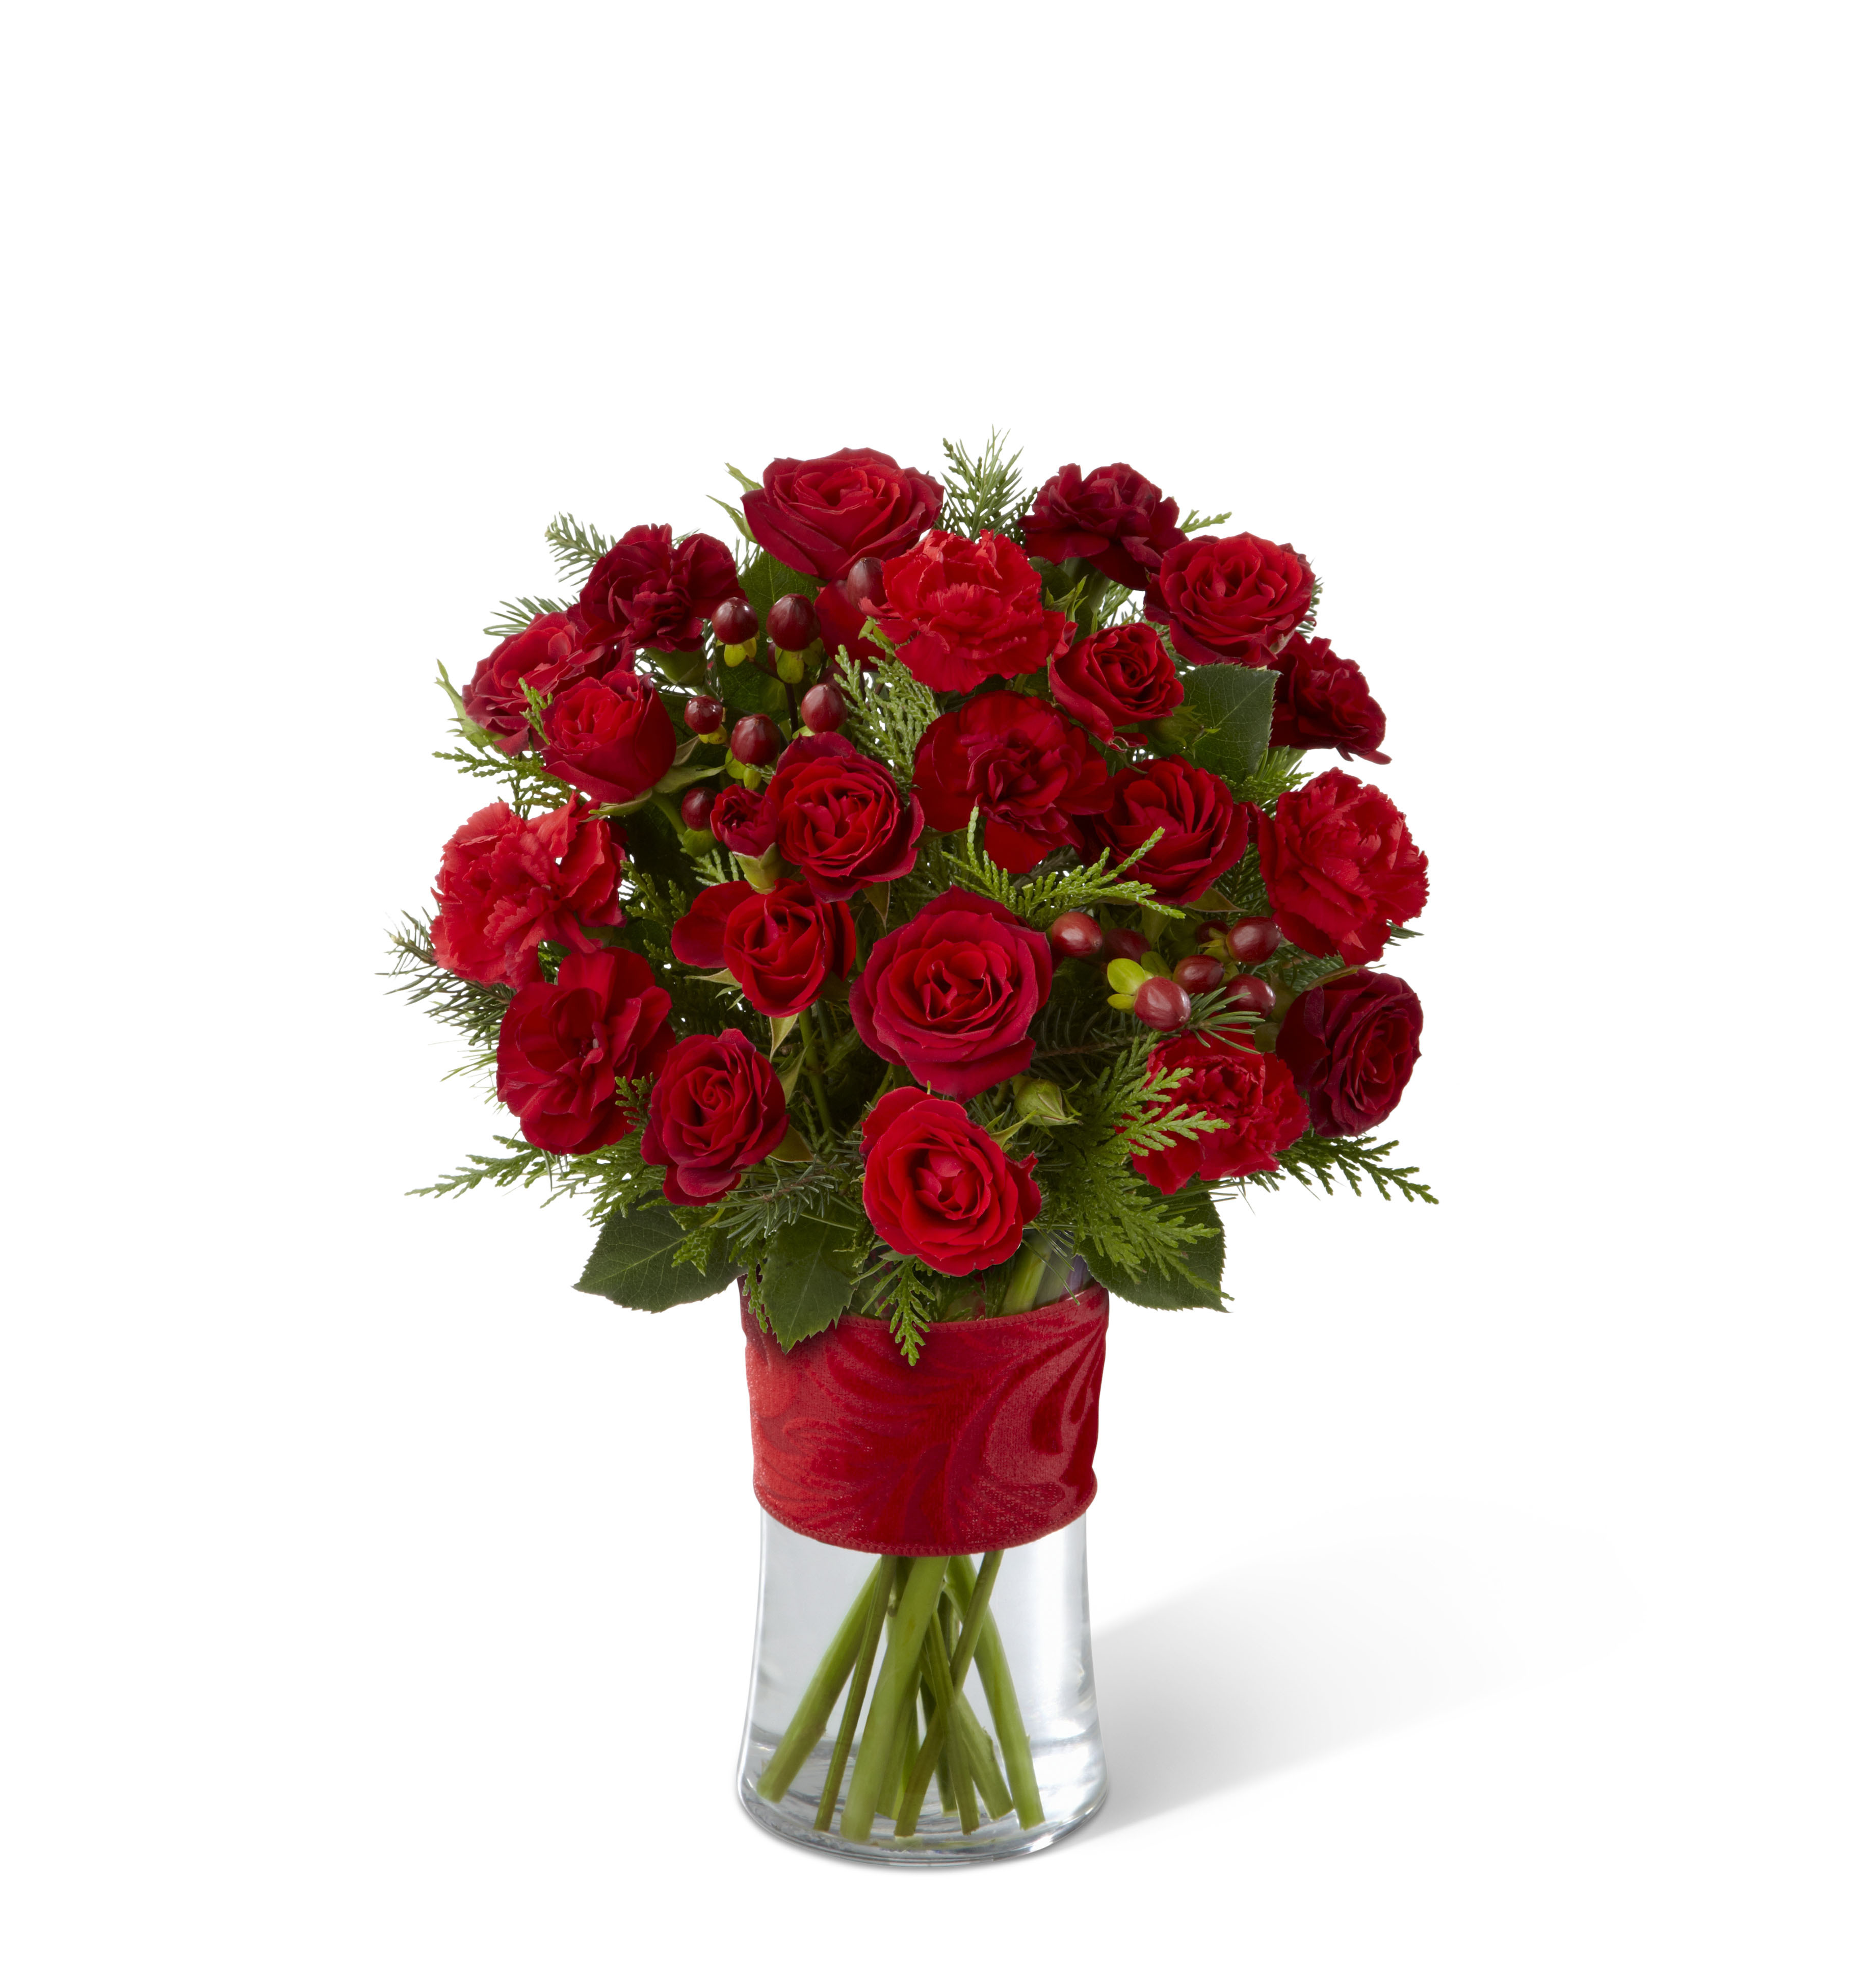 The FTD Spirit of the Season Bouquet